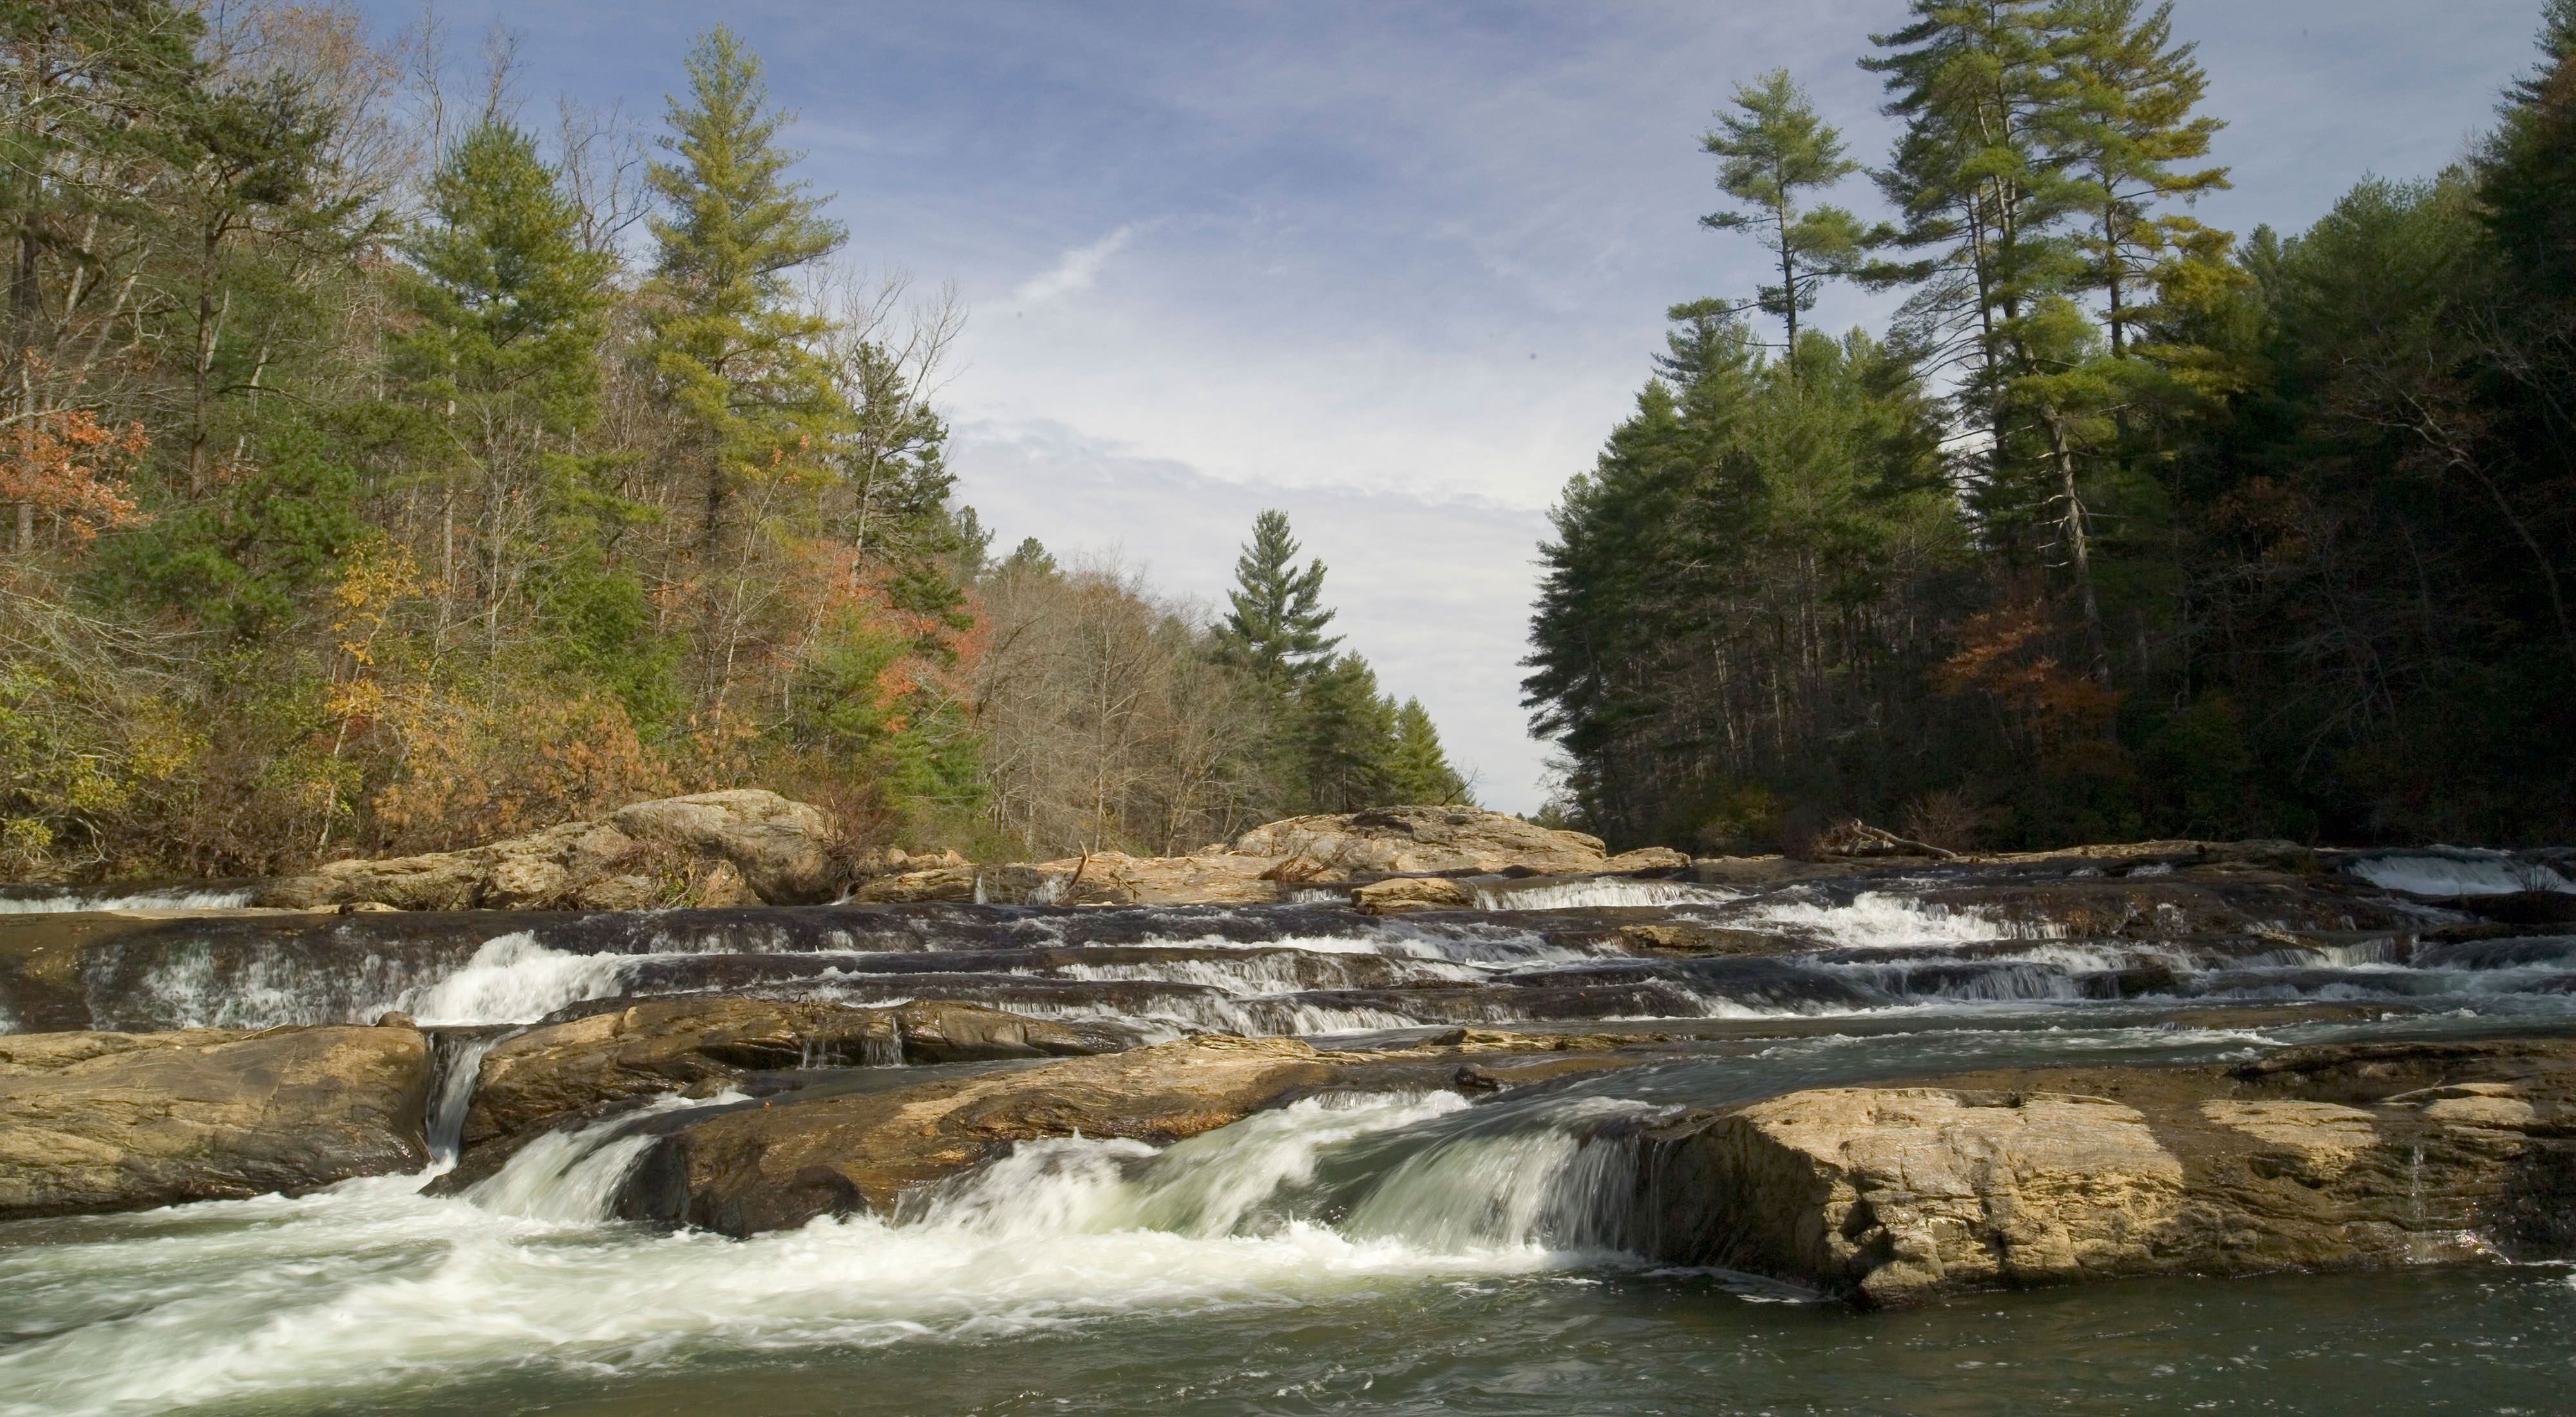 A rocky river flows between two forested banks in Autum